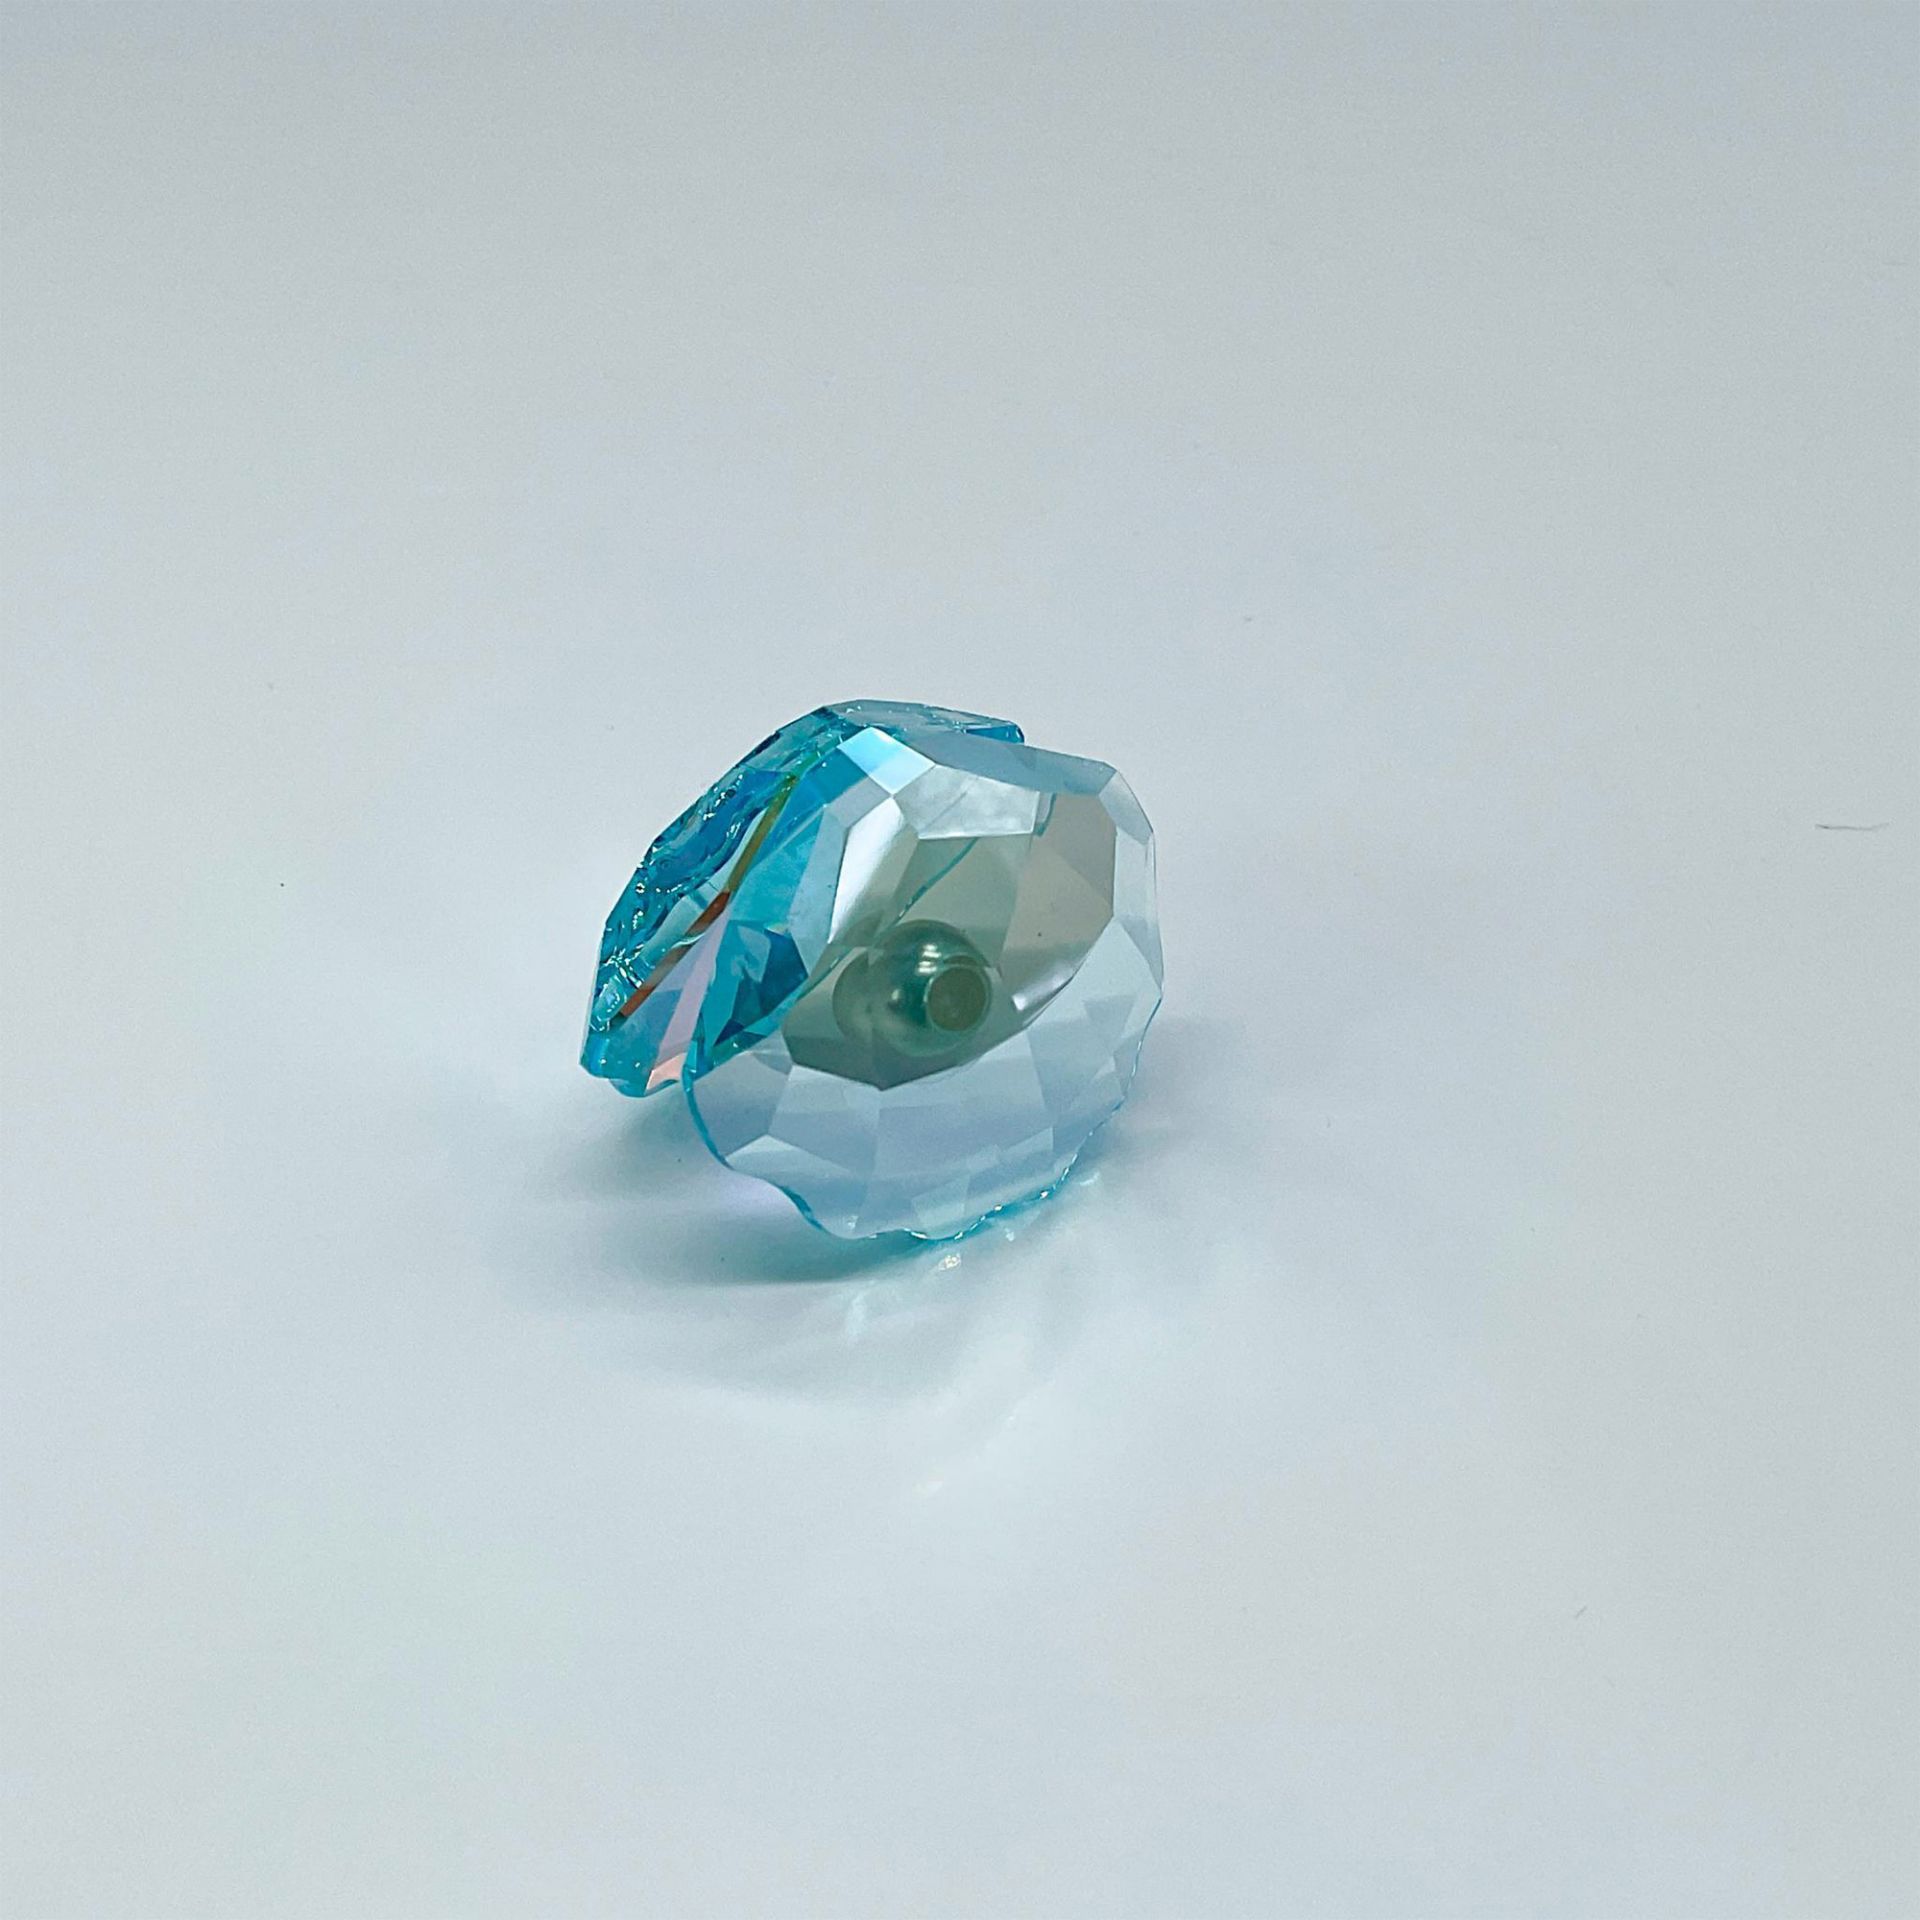 Swarovski Crystal Figurine, Small Blue Shell with Pearl - Image 3 of 4